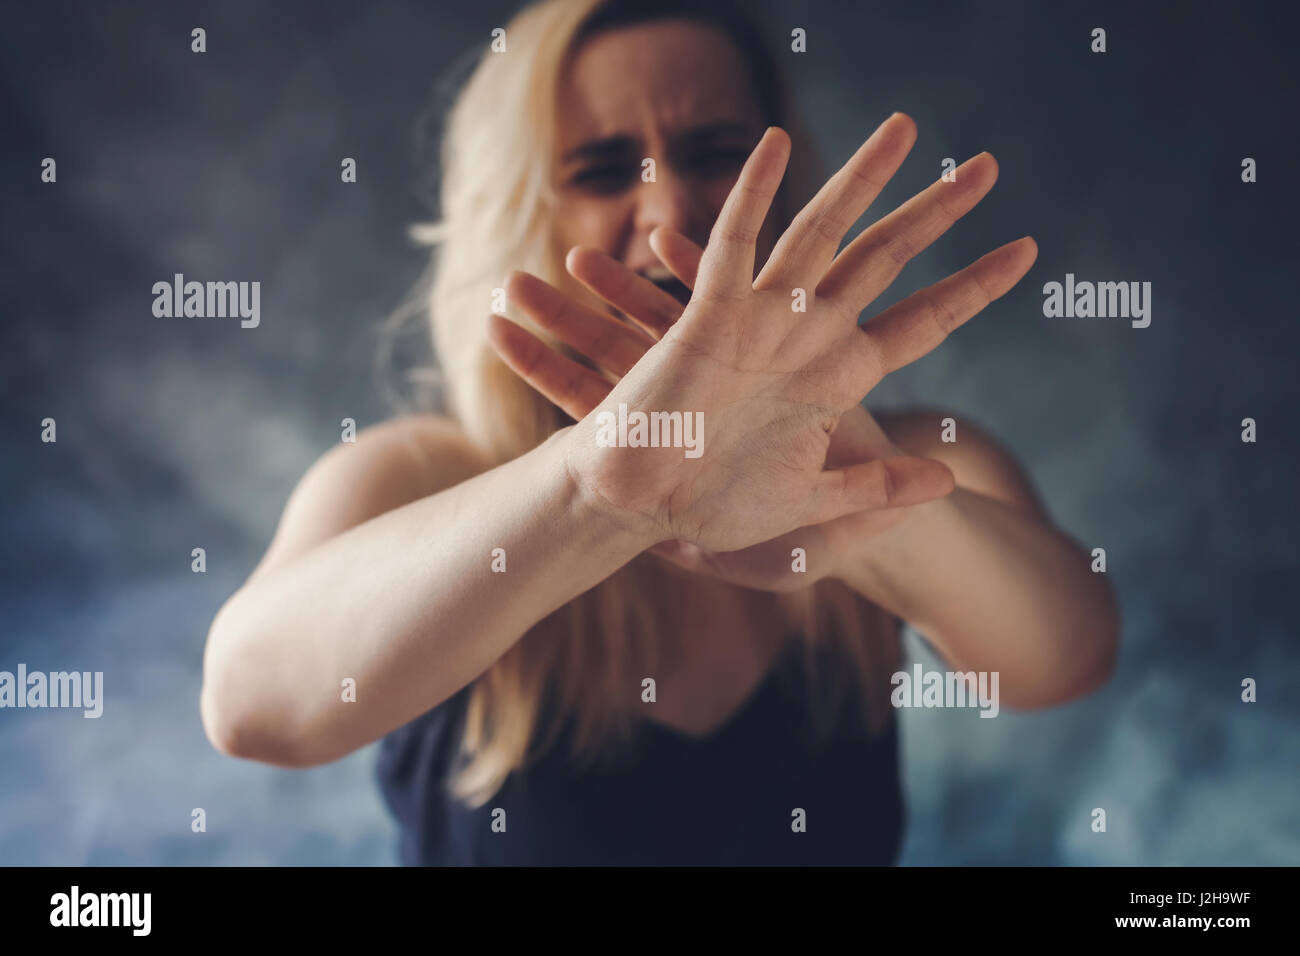 Woman screaming in fear, defending herself with hands in front of her face Stock Photo